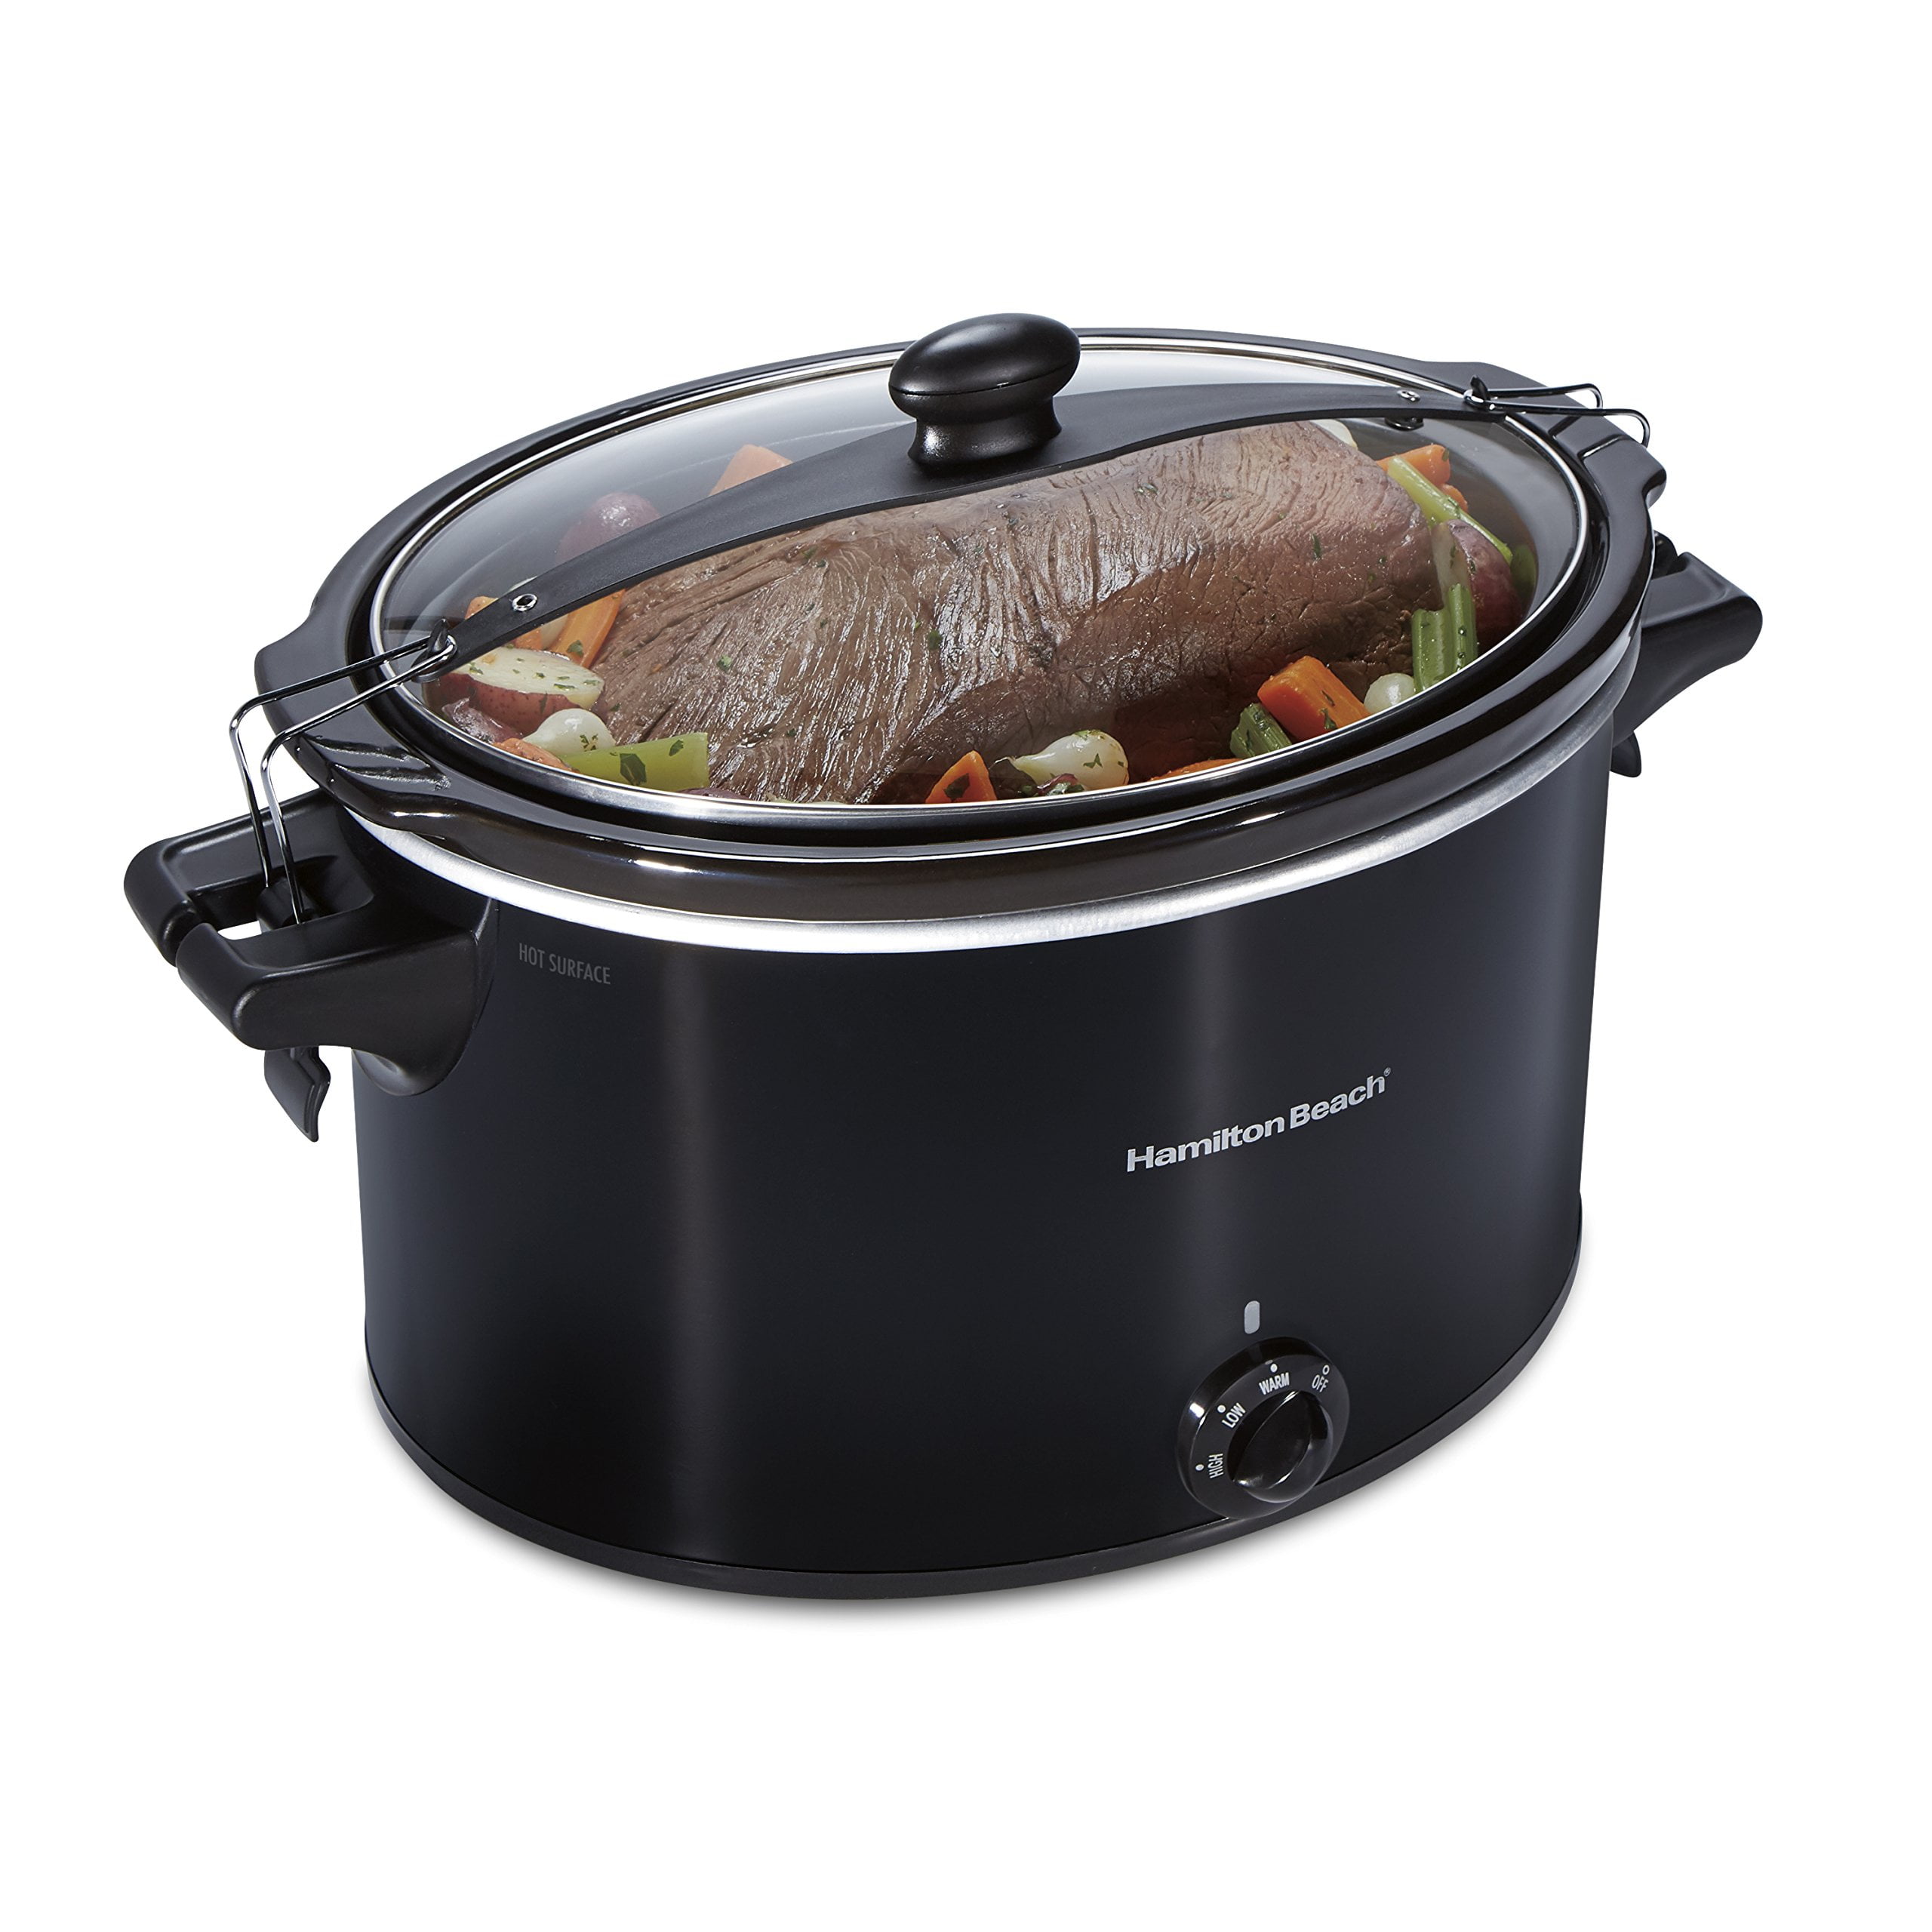 Hamilton Beach Slow Cooker Replacement Parts | lupon.gov.ph